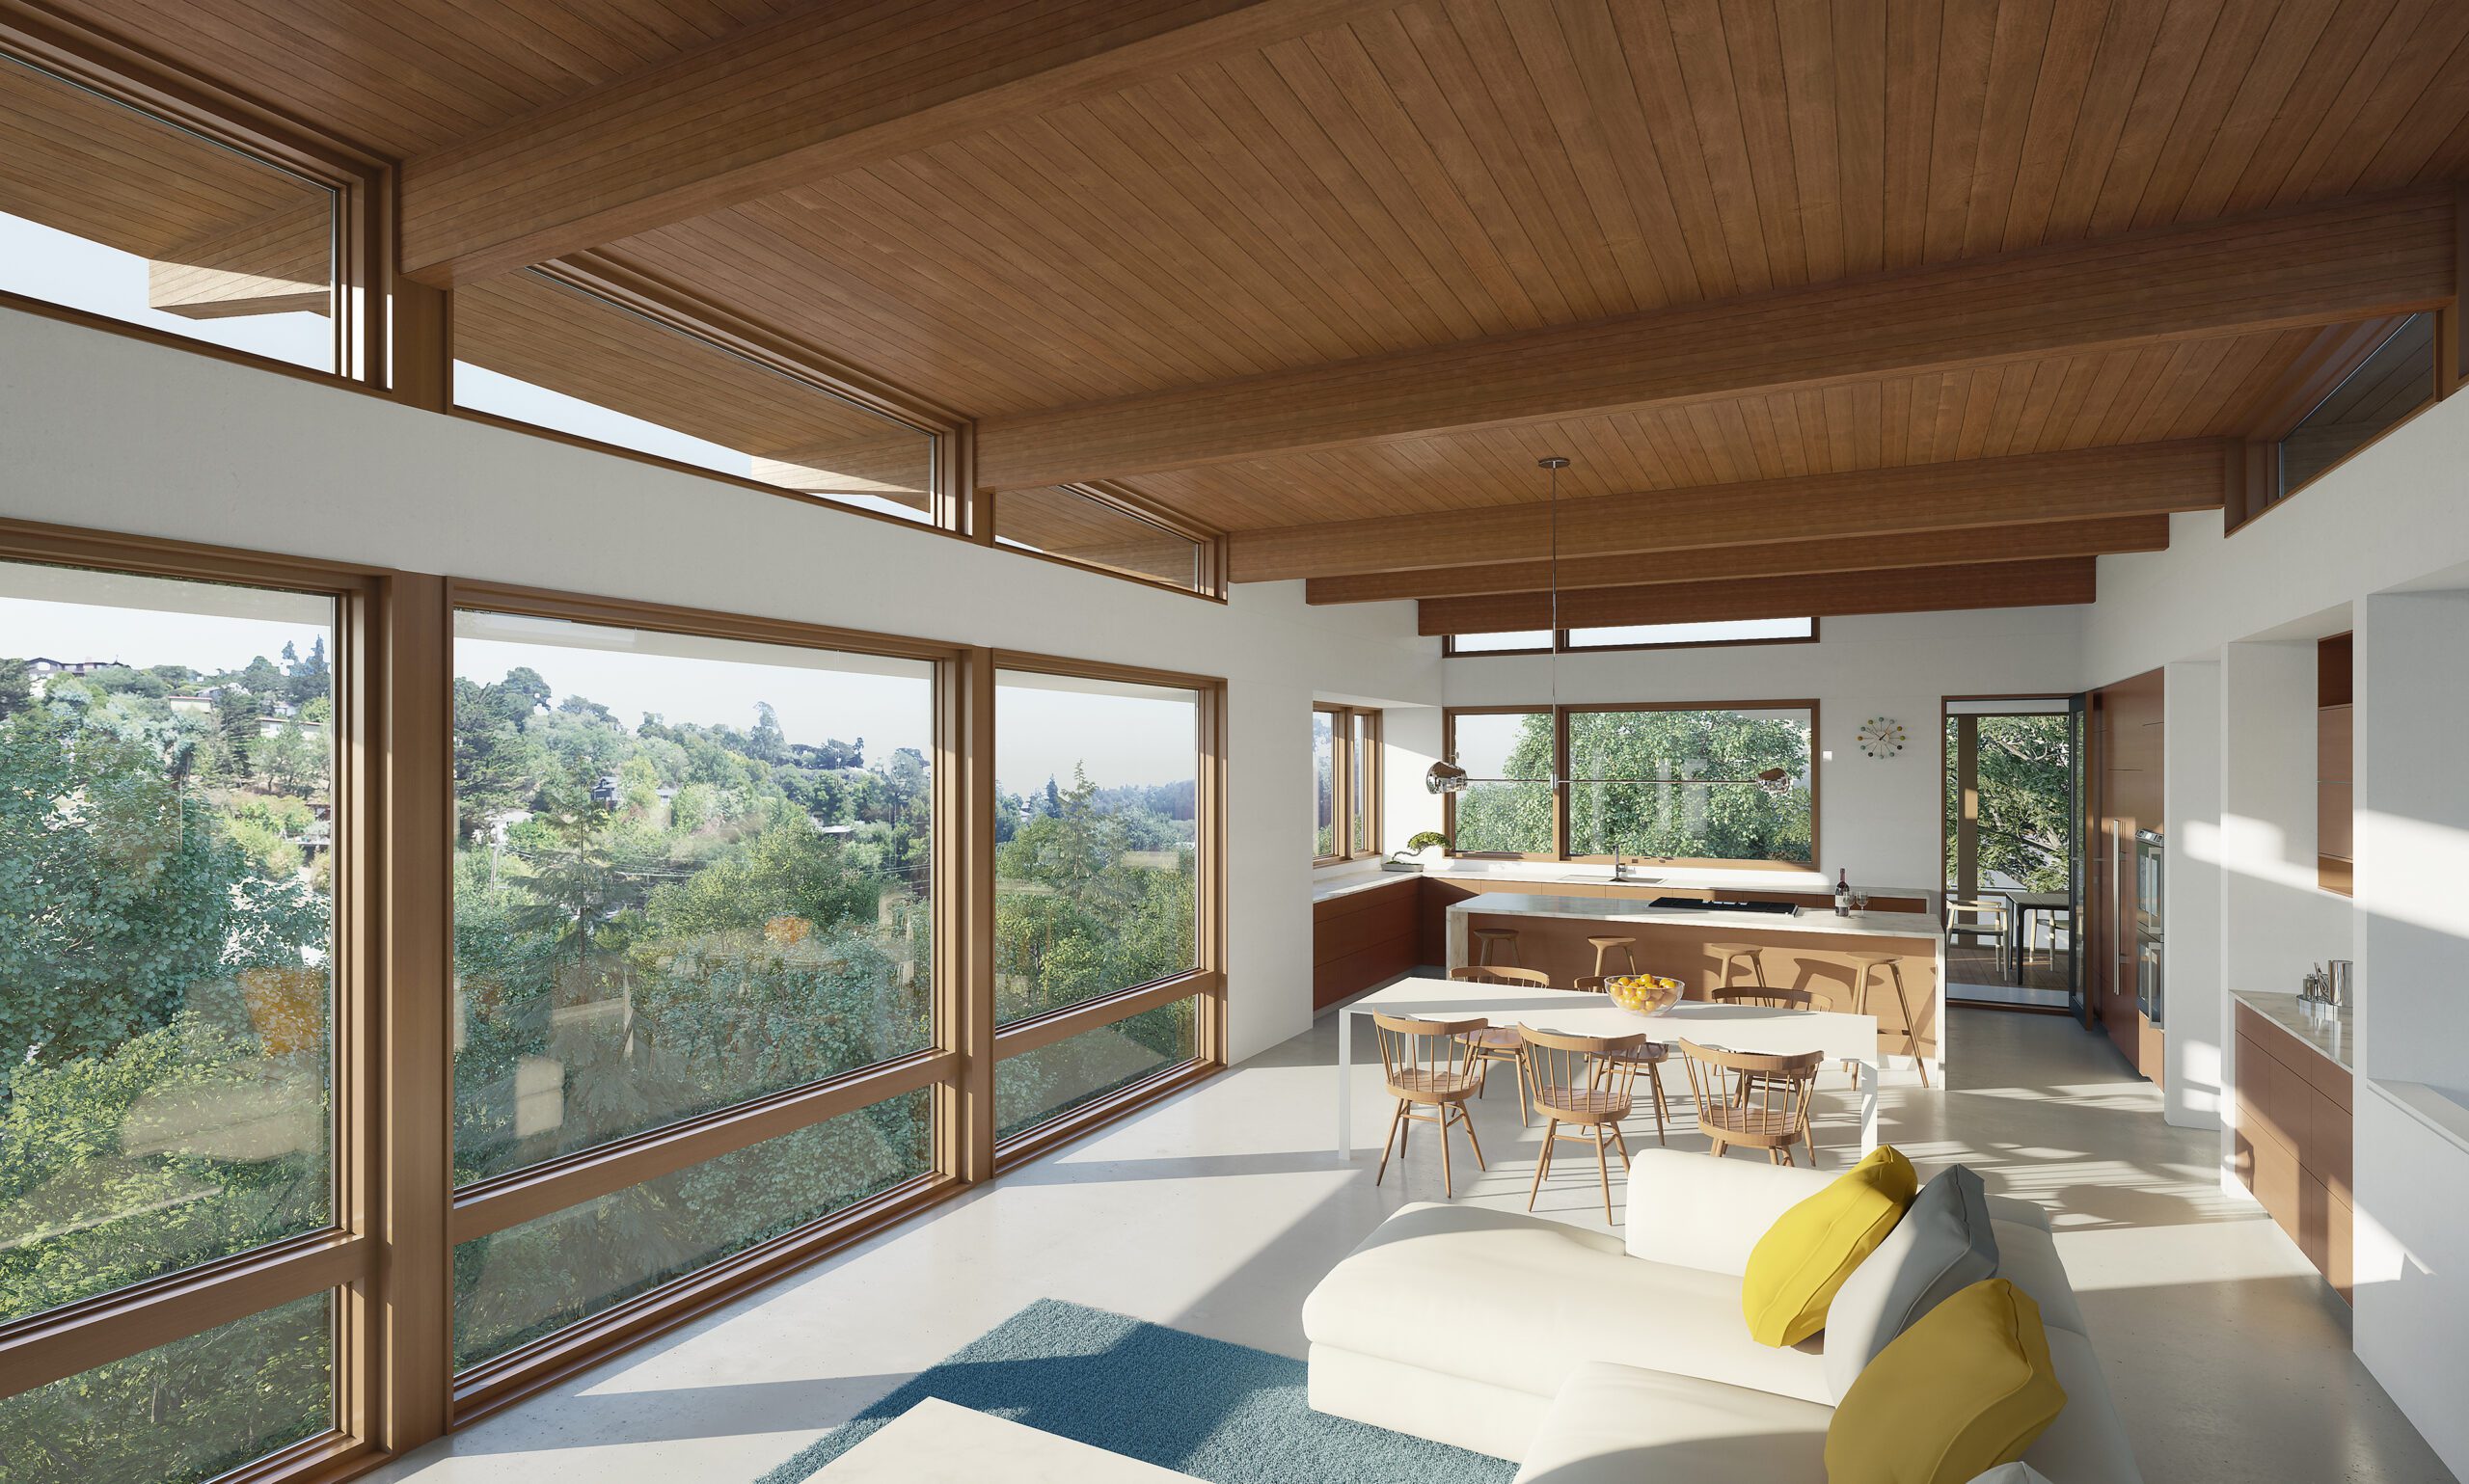 Rendering of the interior of a modern home on a hillside